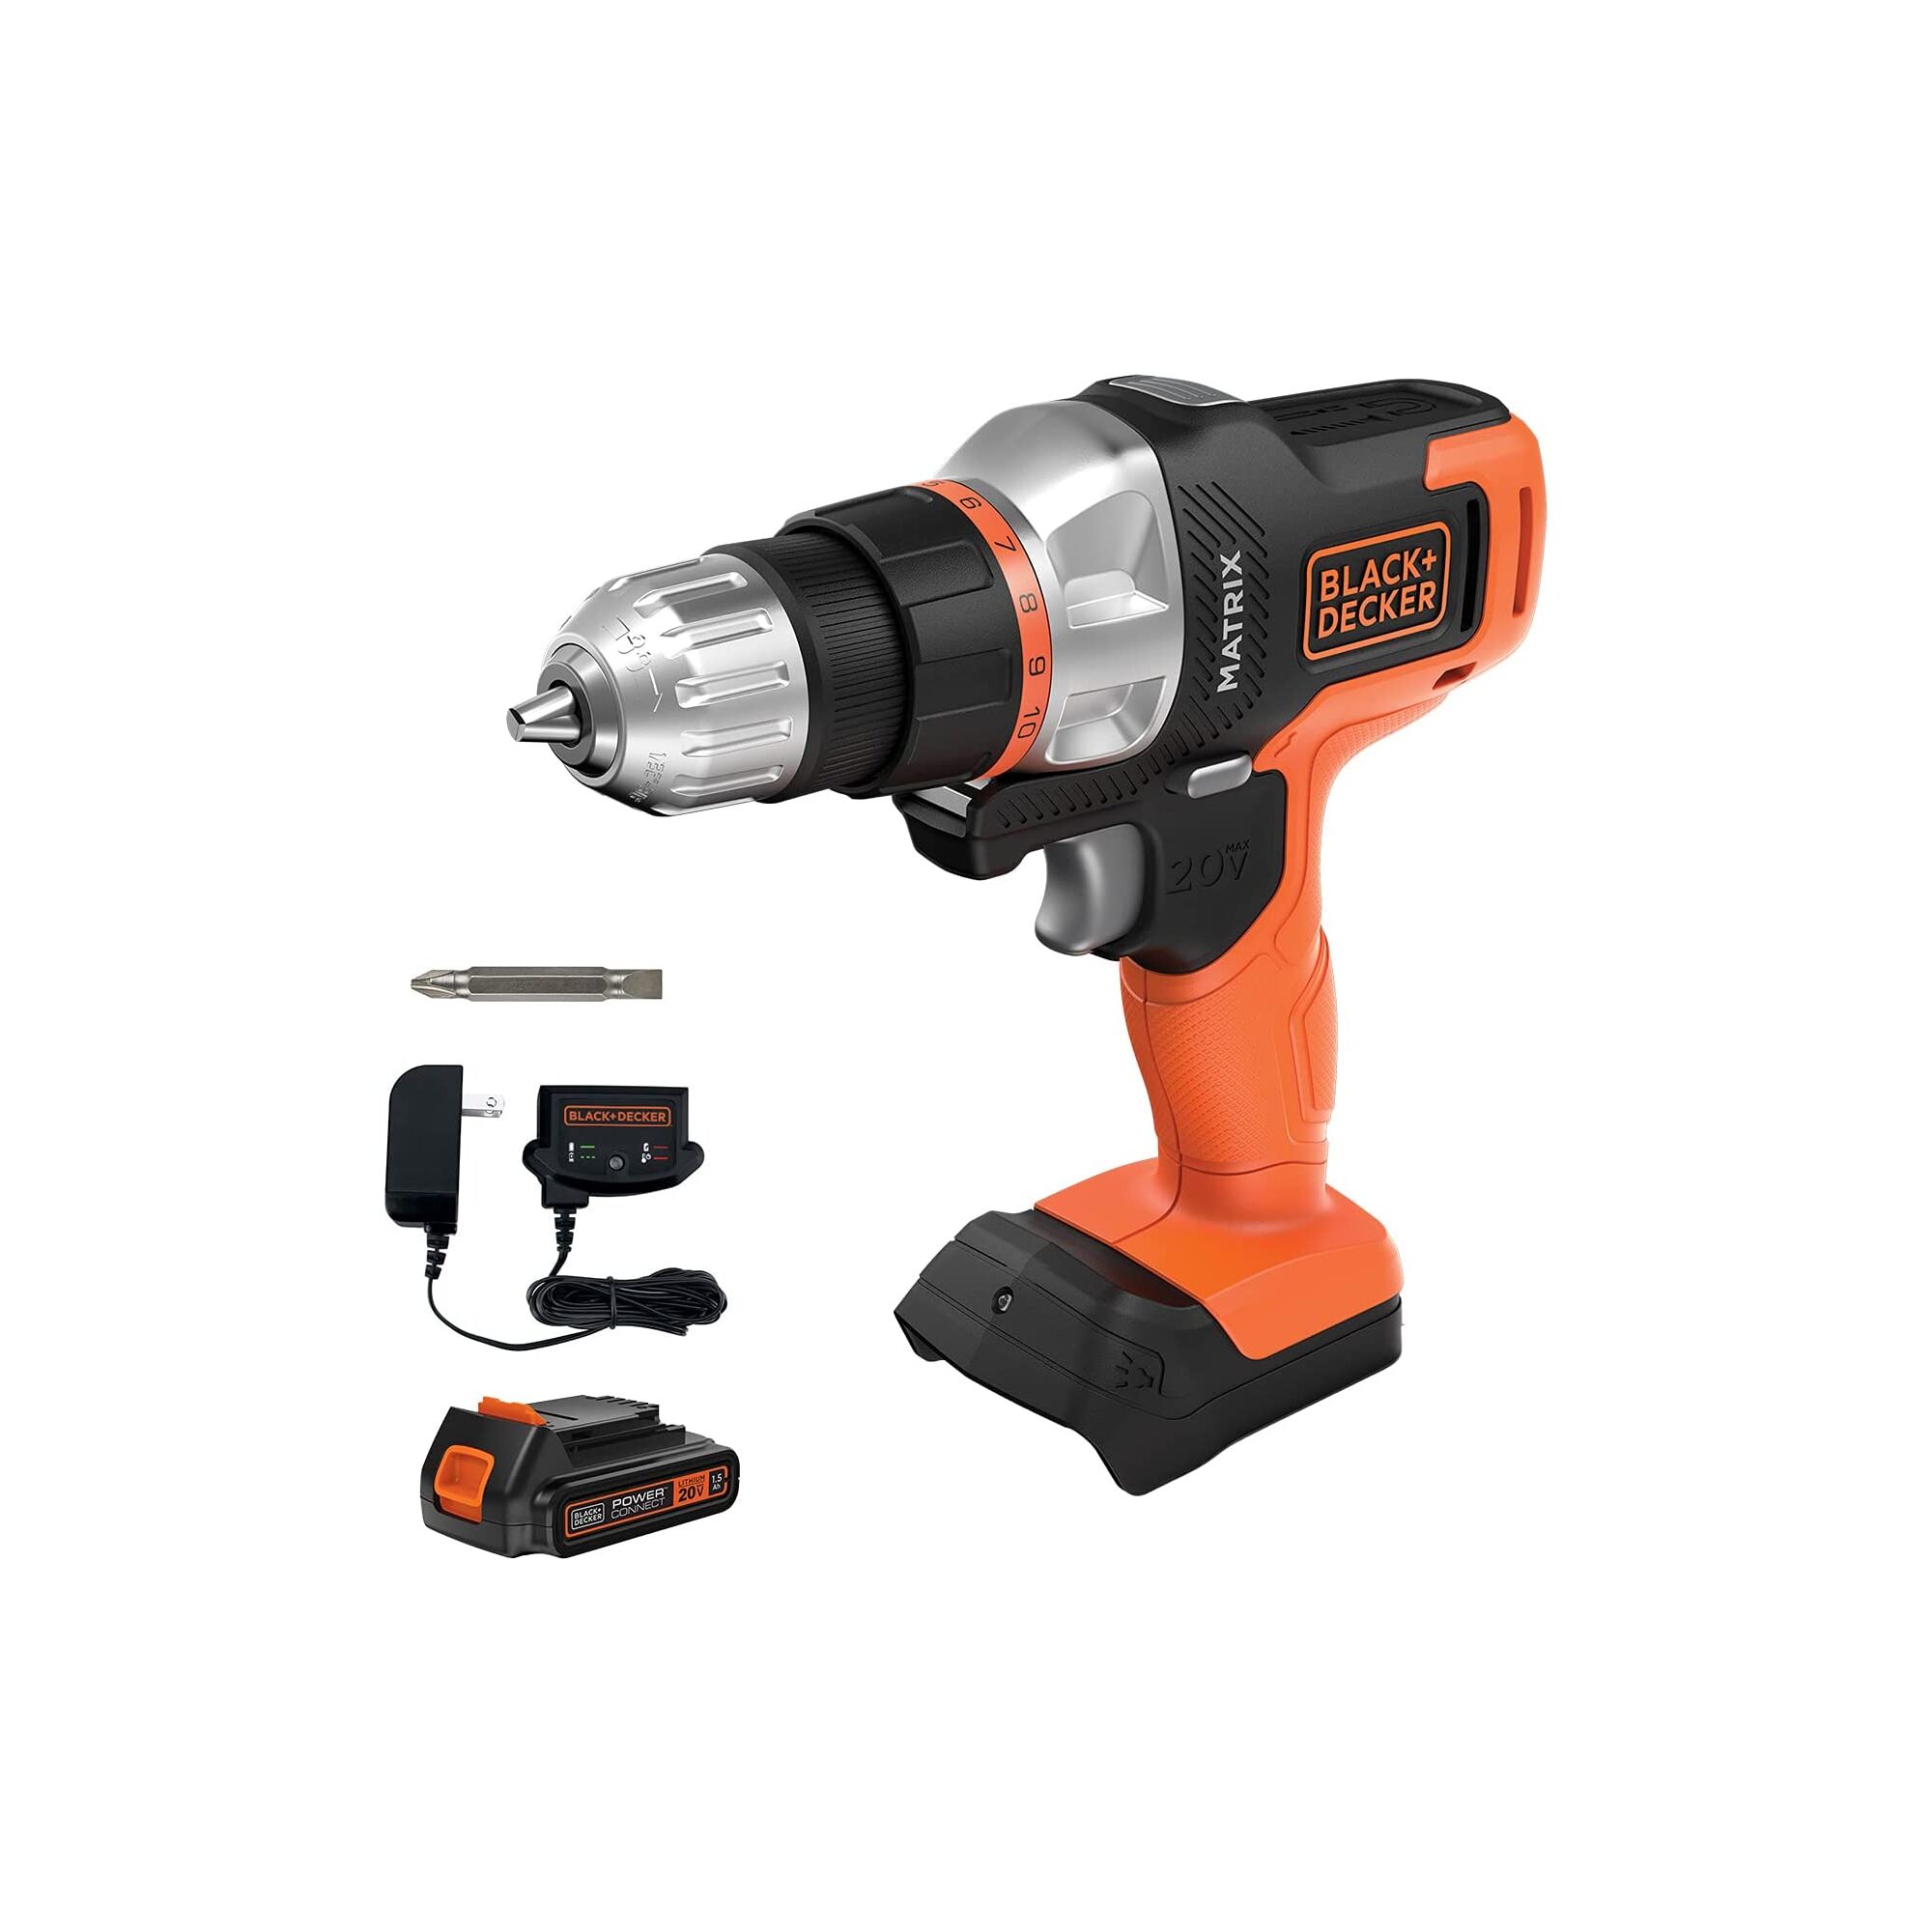 20V Max Matrix Cordless Drill/Driver with lithium battery and charger